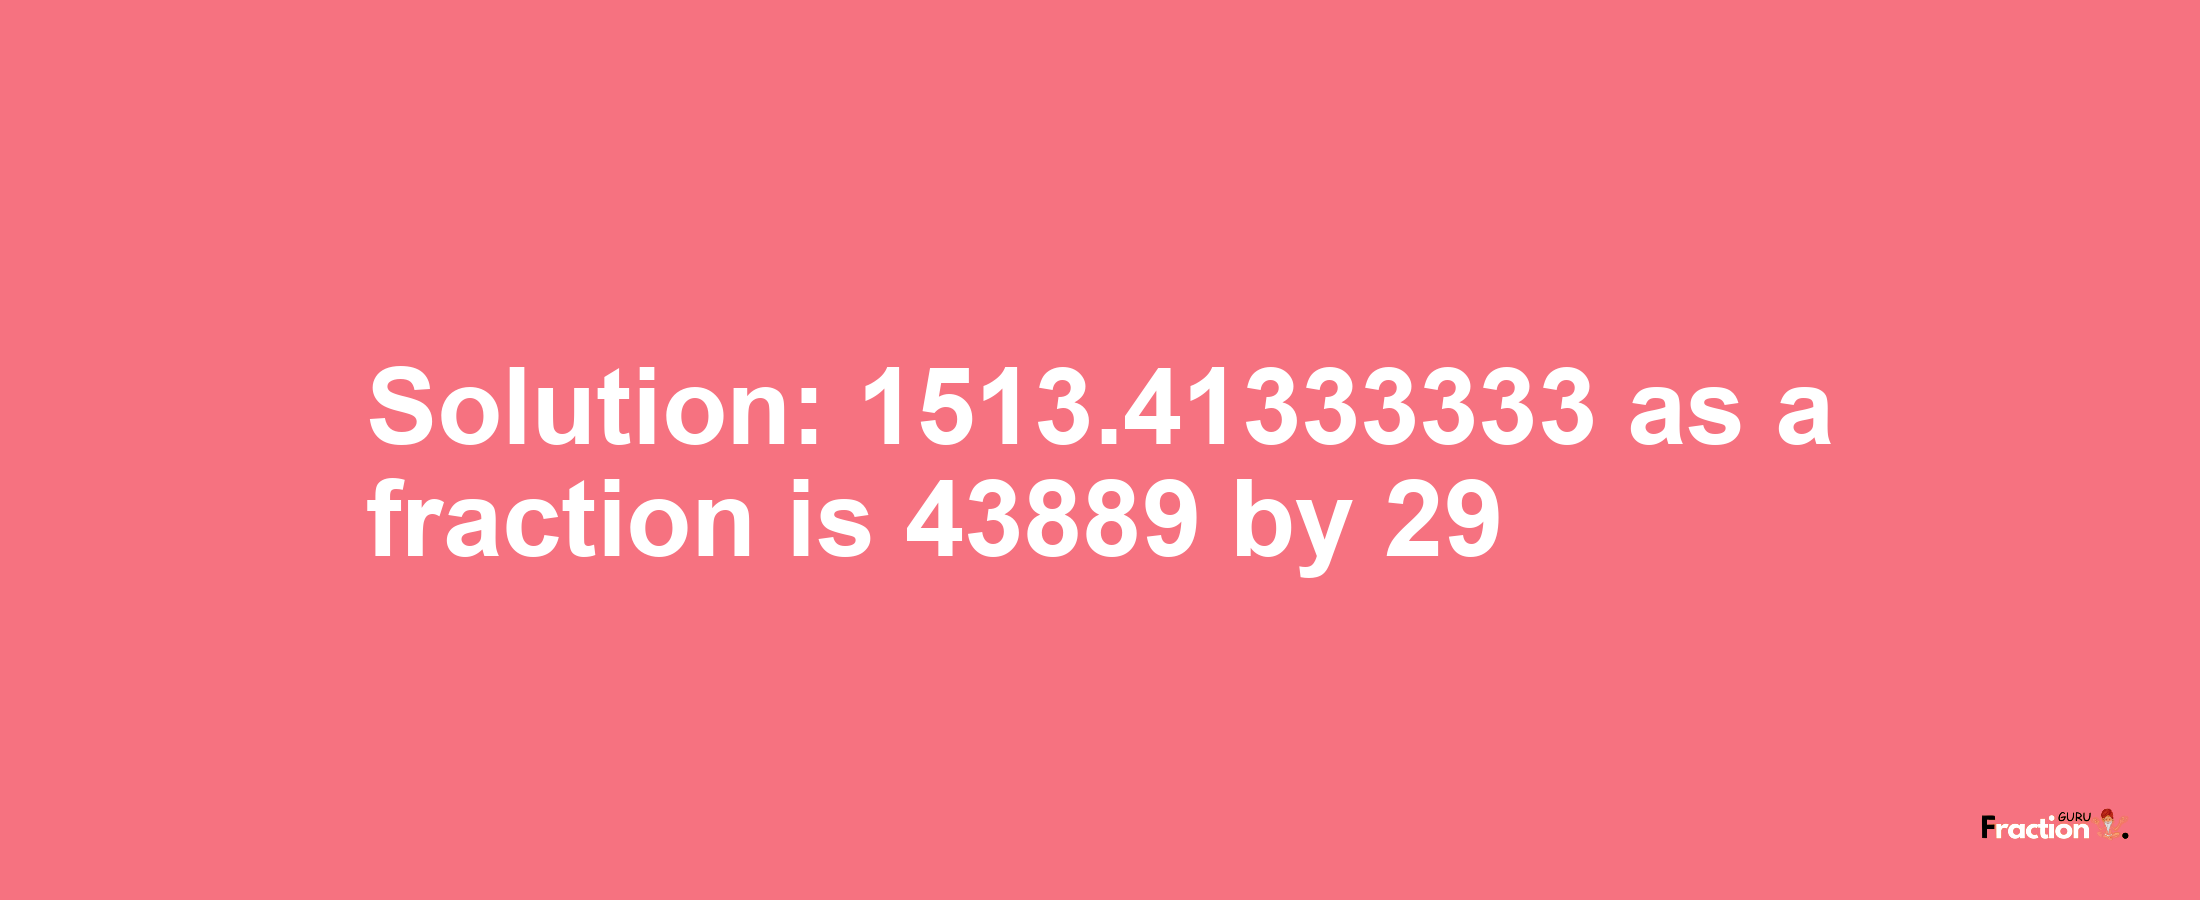 Solution:1513.41333333 as a fraction is 43889/29